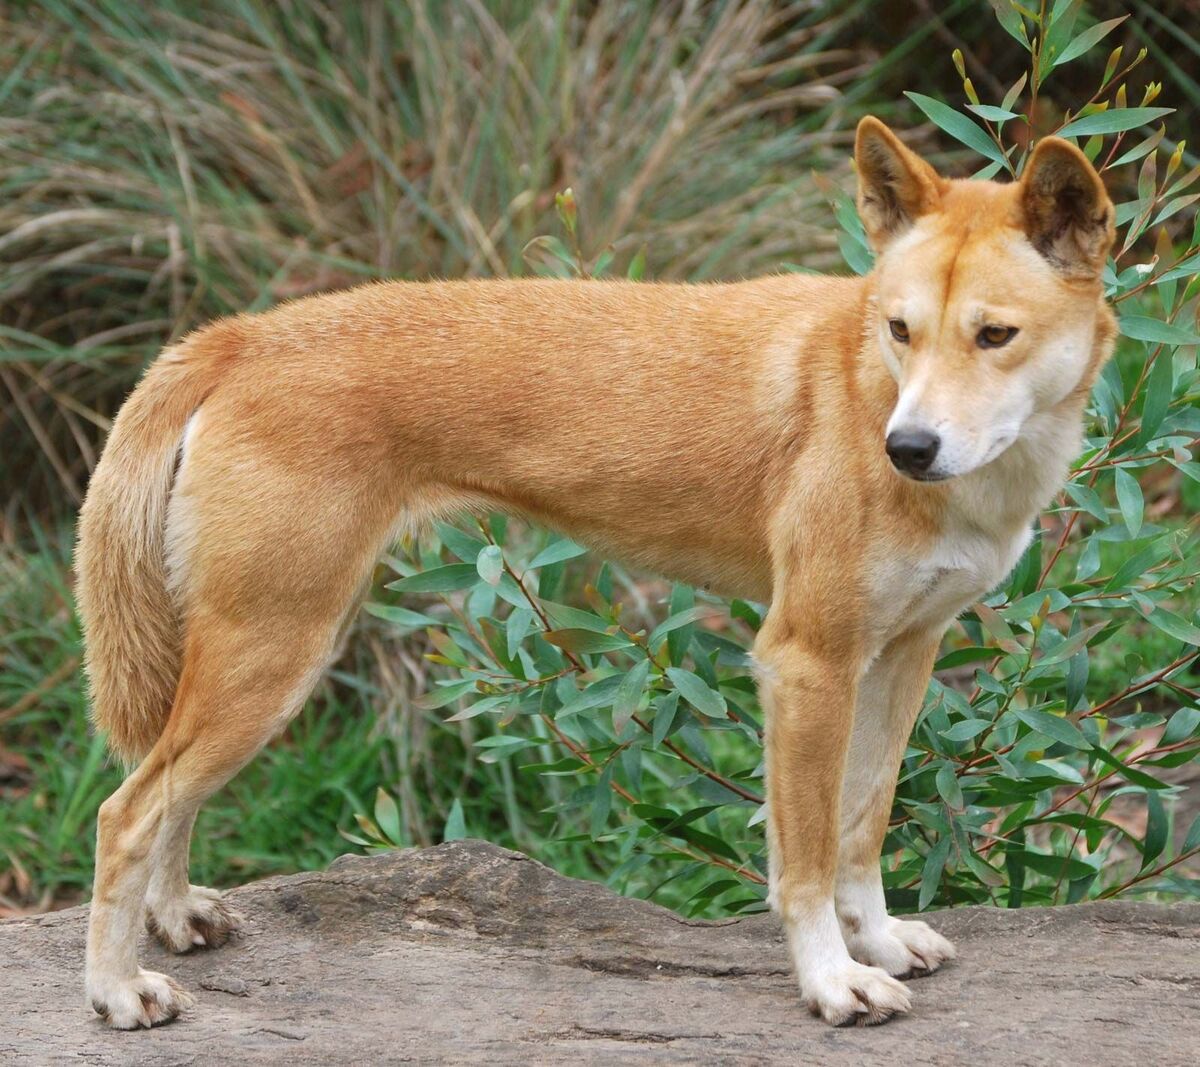 A Domesticated Dingo? No, but Some Are Getting Less Wild